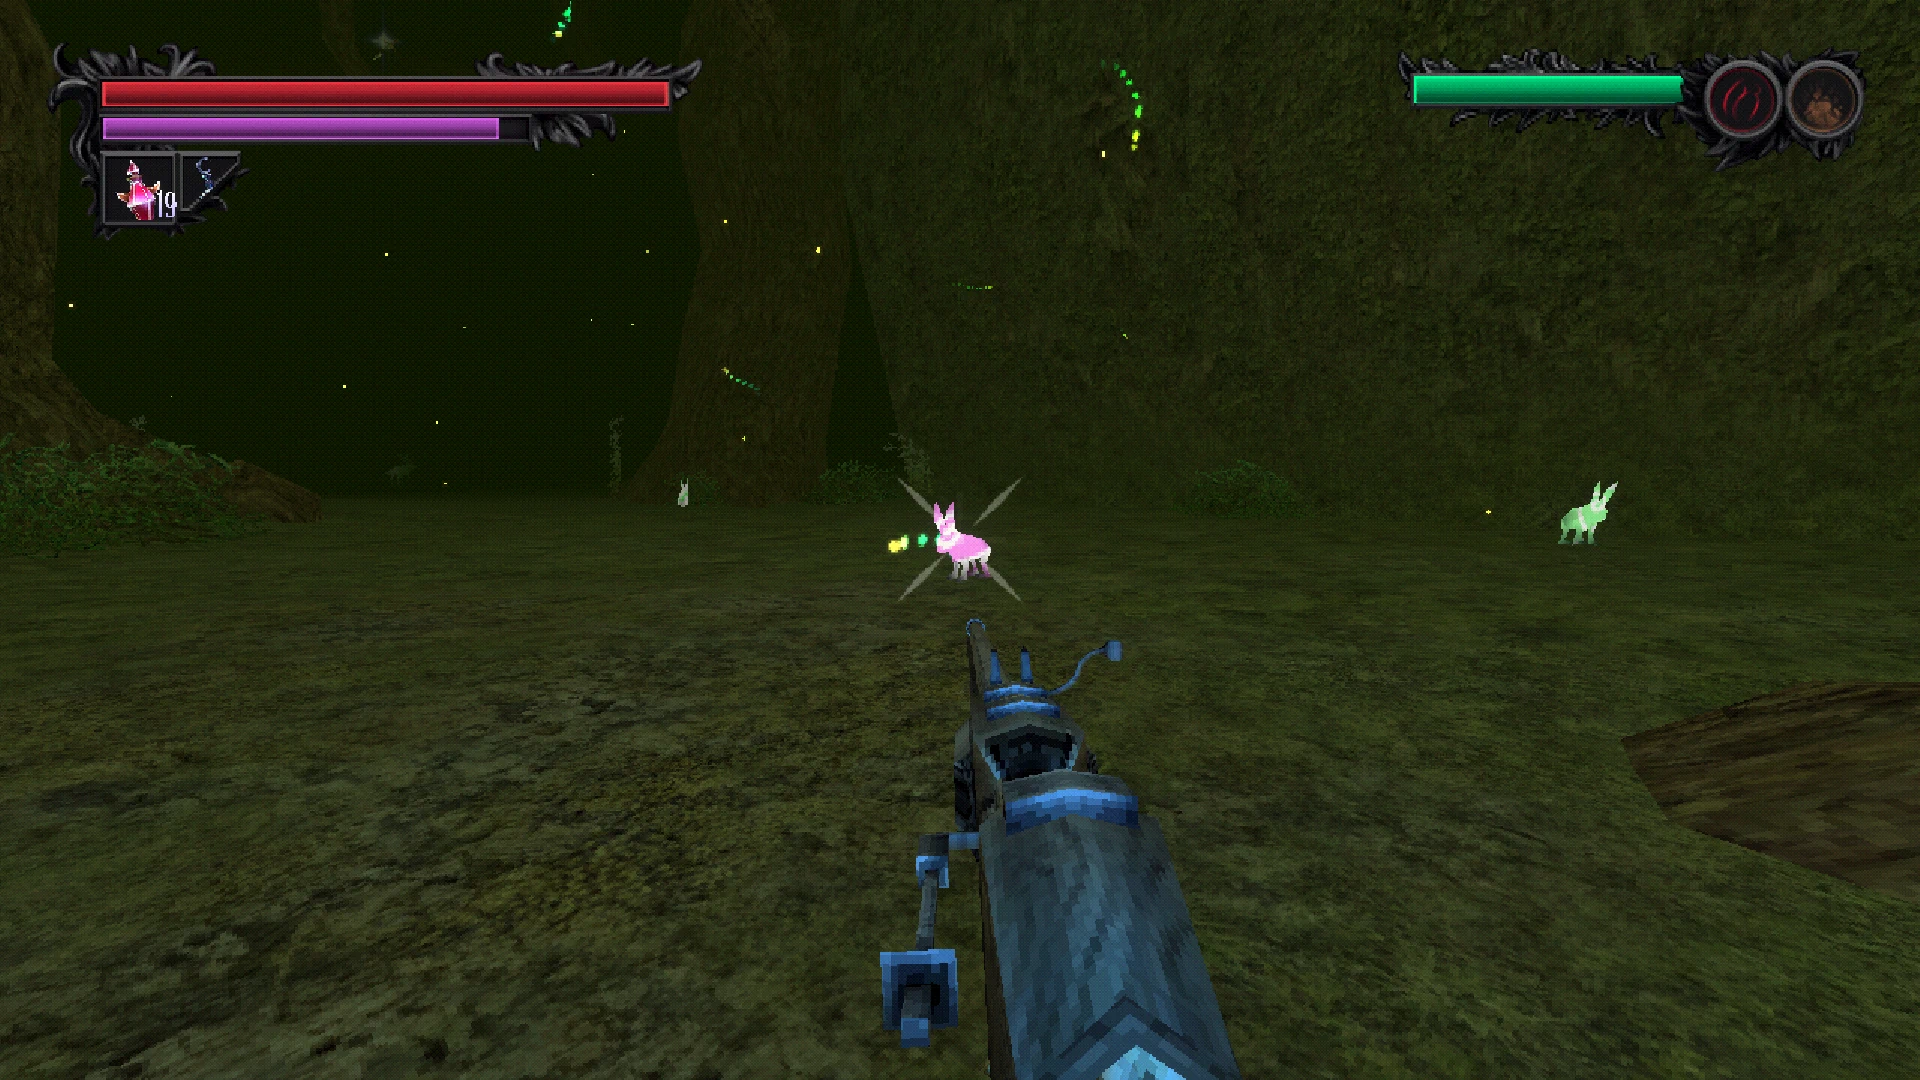 An image of the player aiming a musket at a rabbit-like kodama spirit.